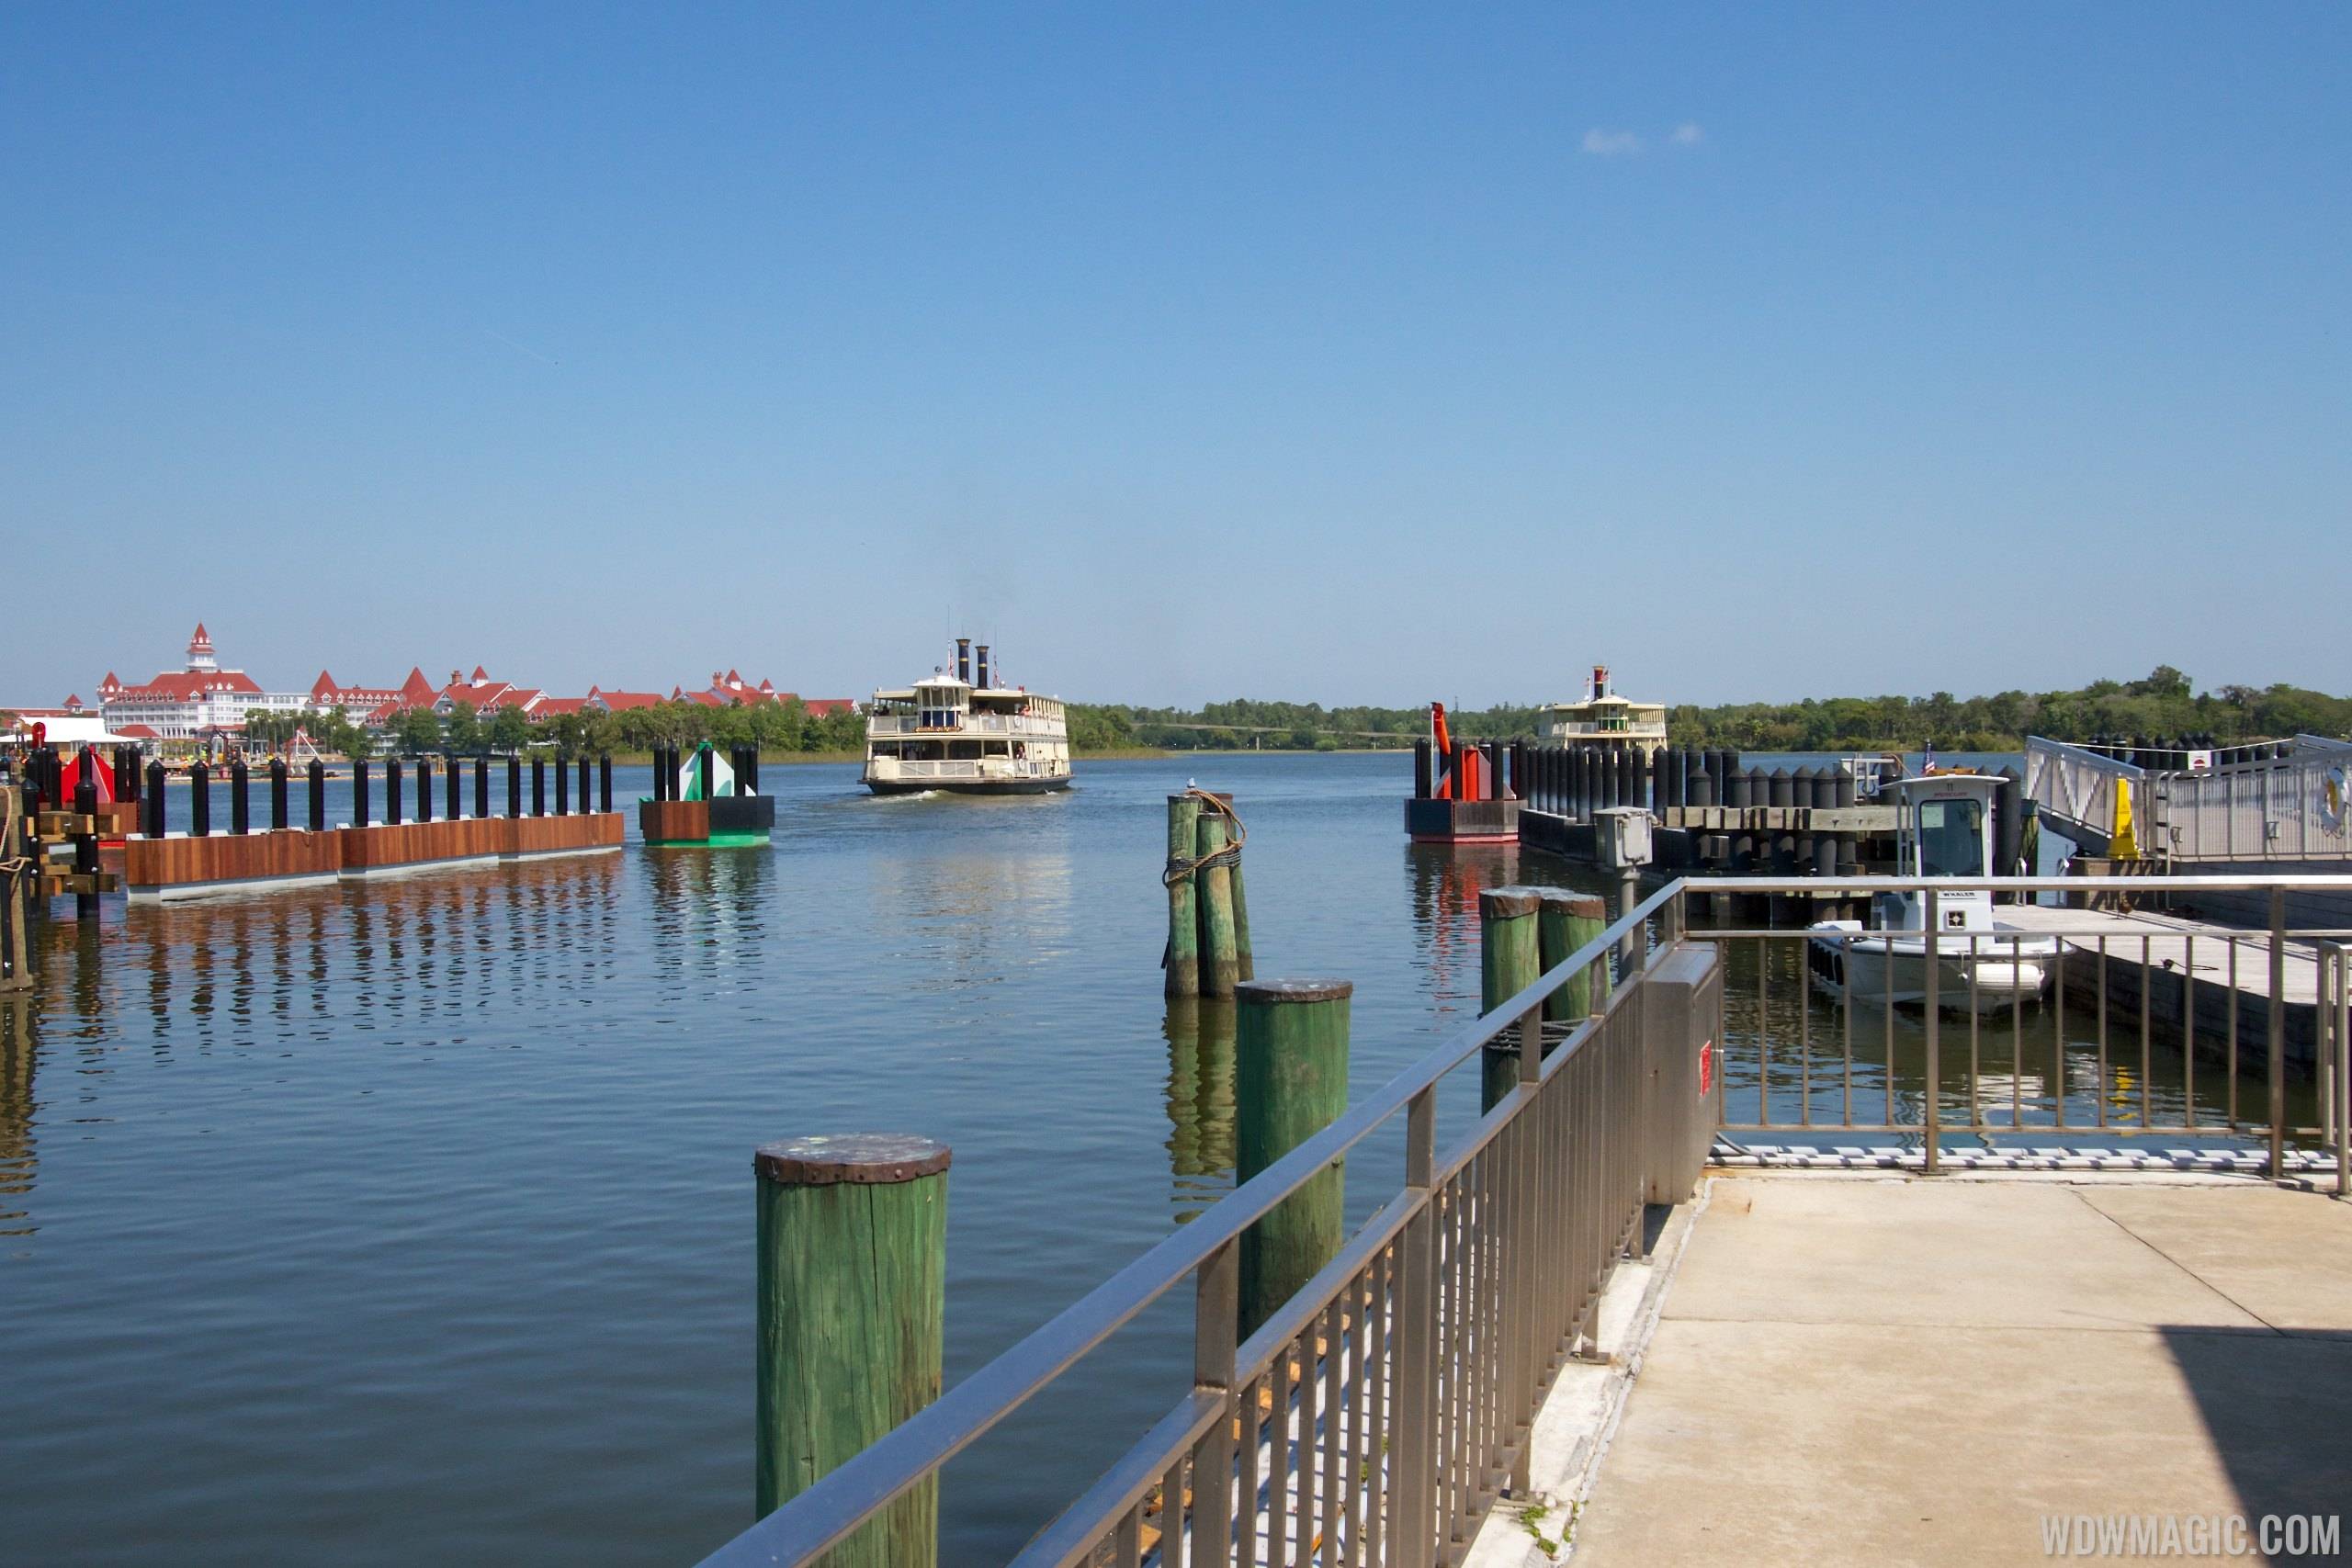 PHOTOS - Transportation and Ticket Center second Ferry Boat dock now in service